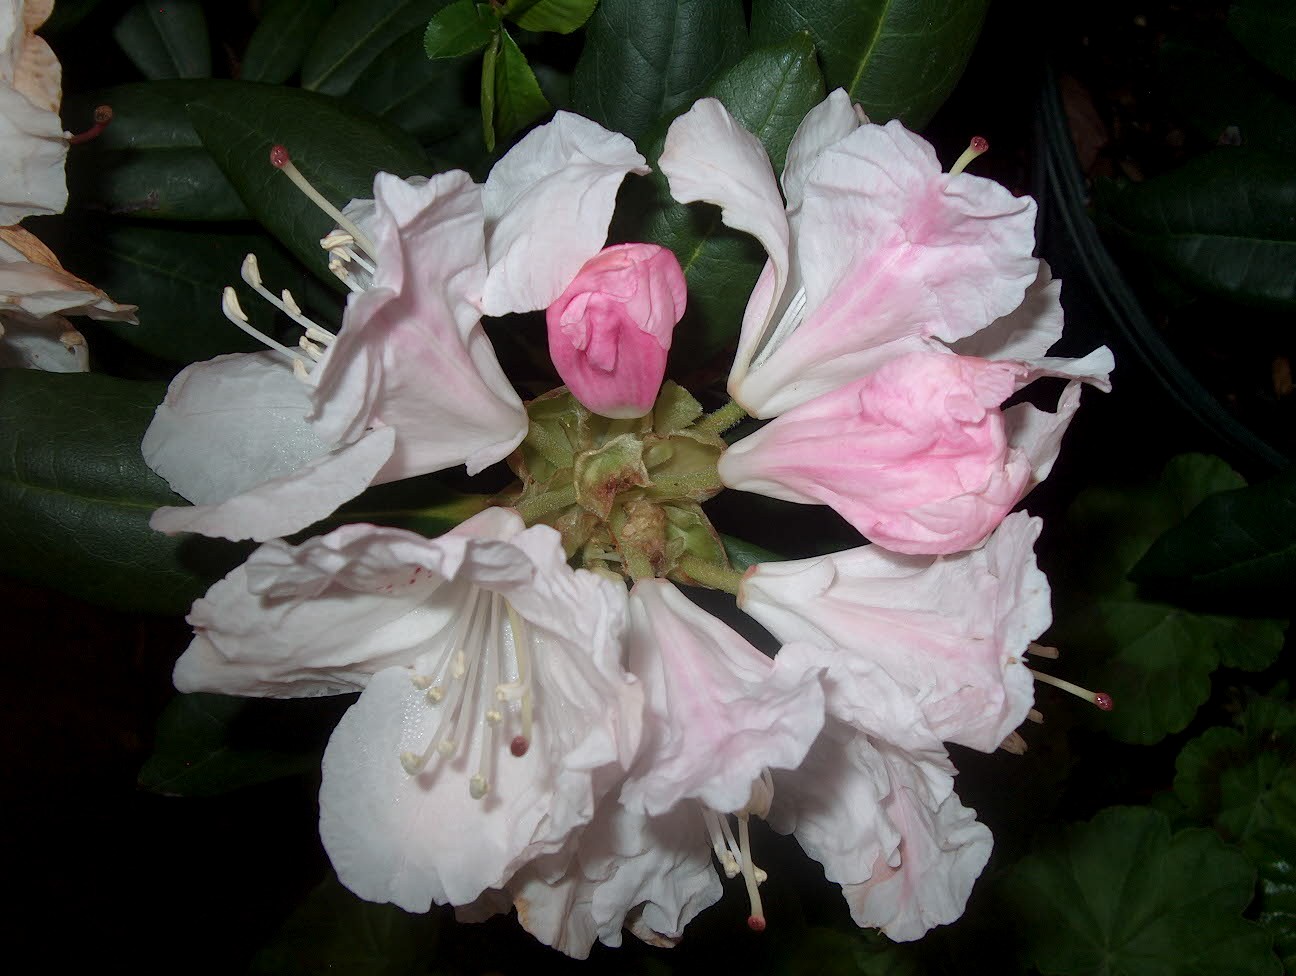 Rhododendron x 'Charles Loomis' / Charles Loomis Rhododendron